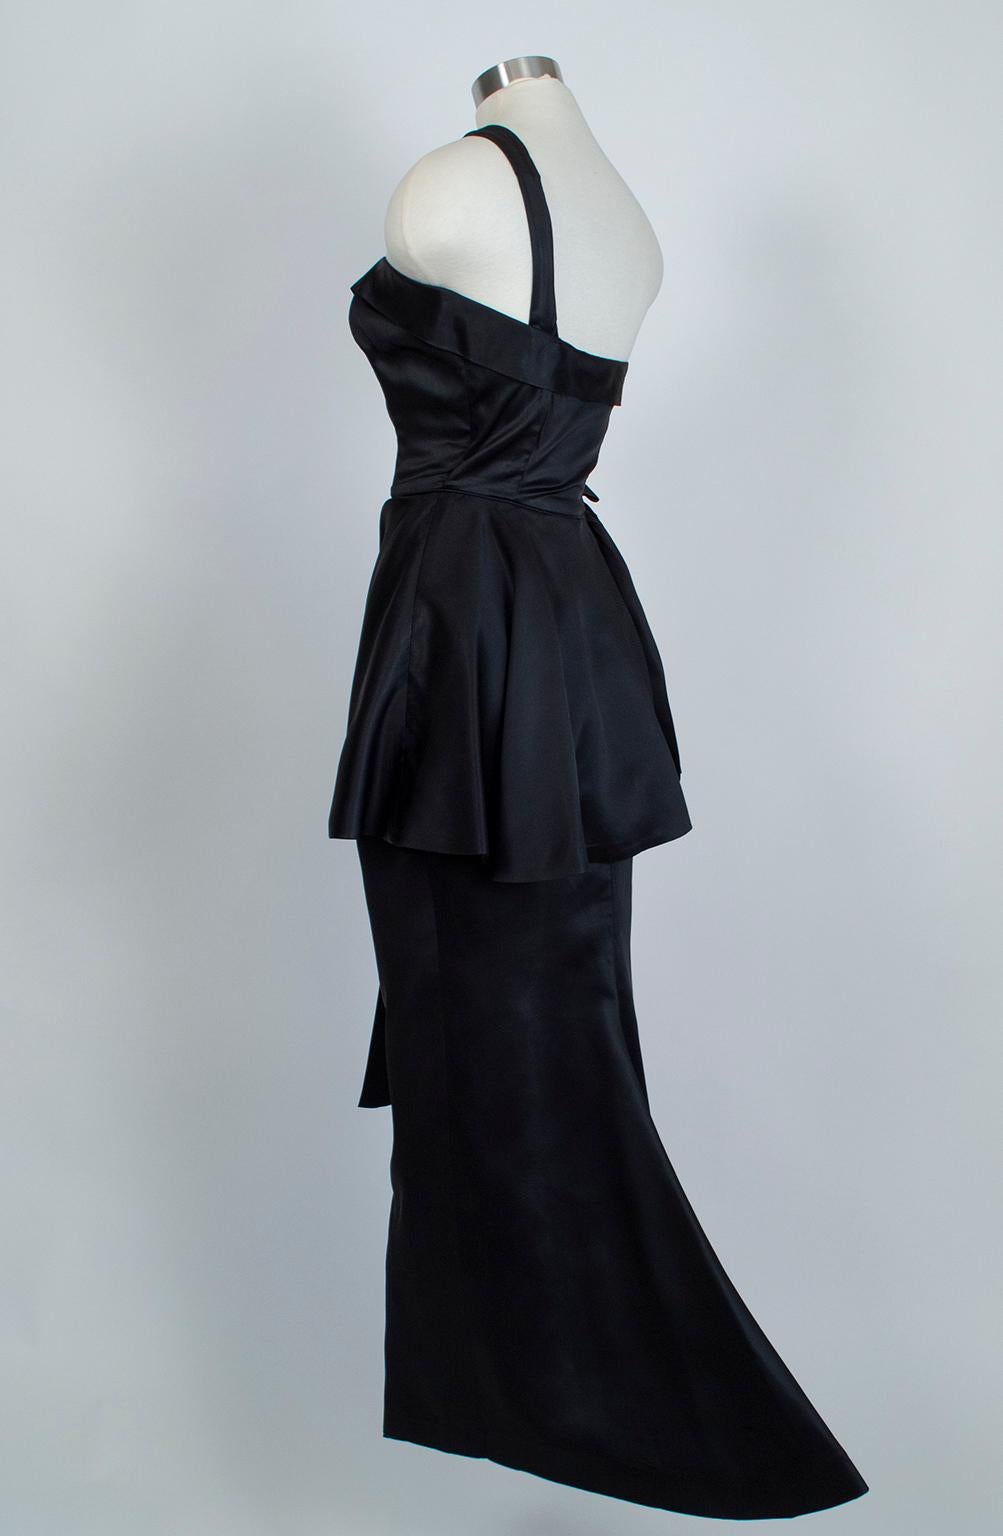 A Balmain-inspired frock to take your breath away! Perfectly balanced, this gown combines modern asymmetry, a classic hourglass shape and dramatic midsection details to create an unforgettable black tie garment. An heirloom piece you will seek out